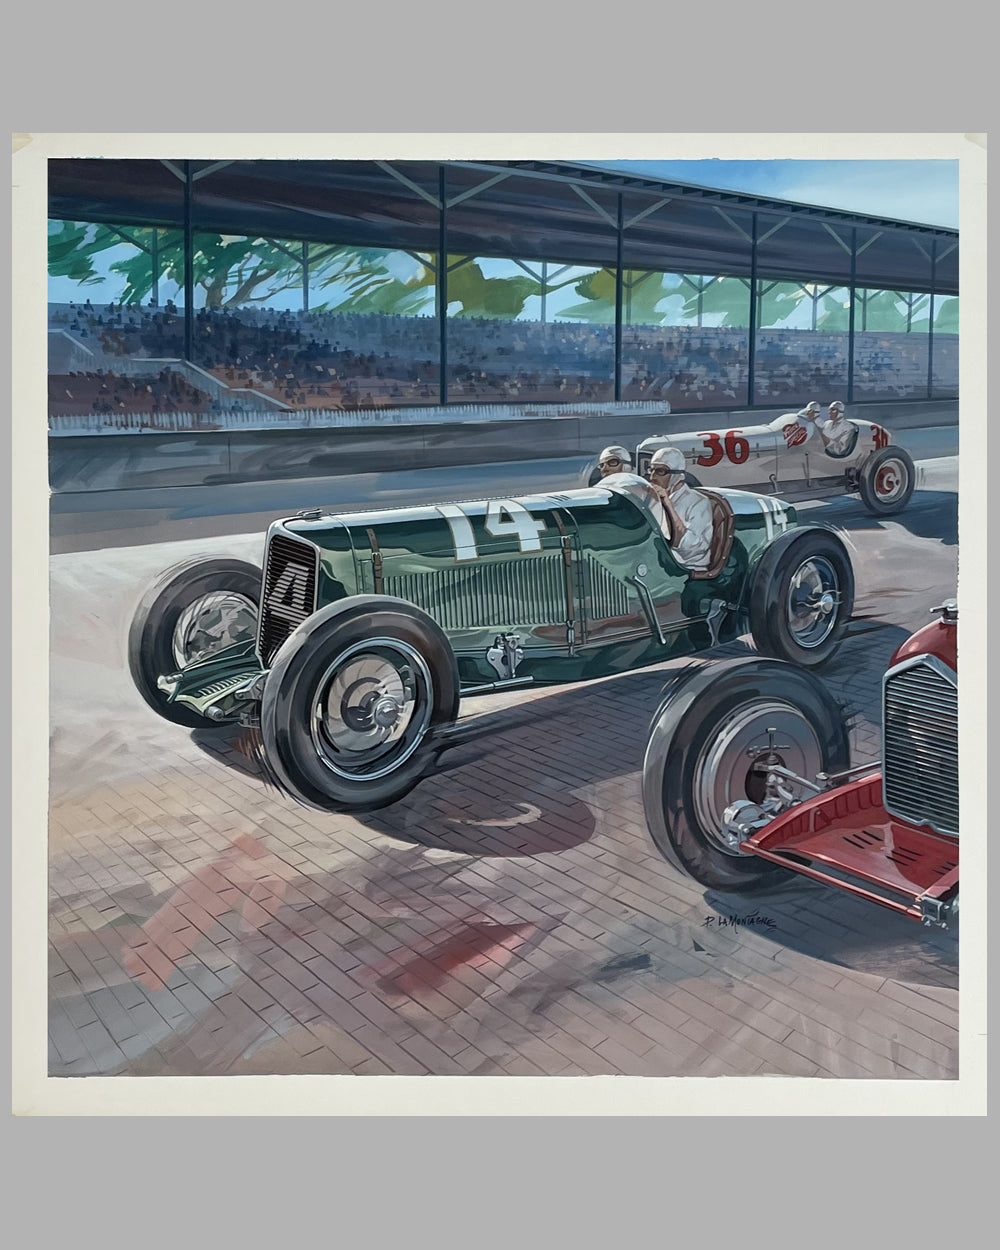 1933 Chrysler Golden Seal Special in the Lead painting by P. La Montagne